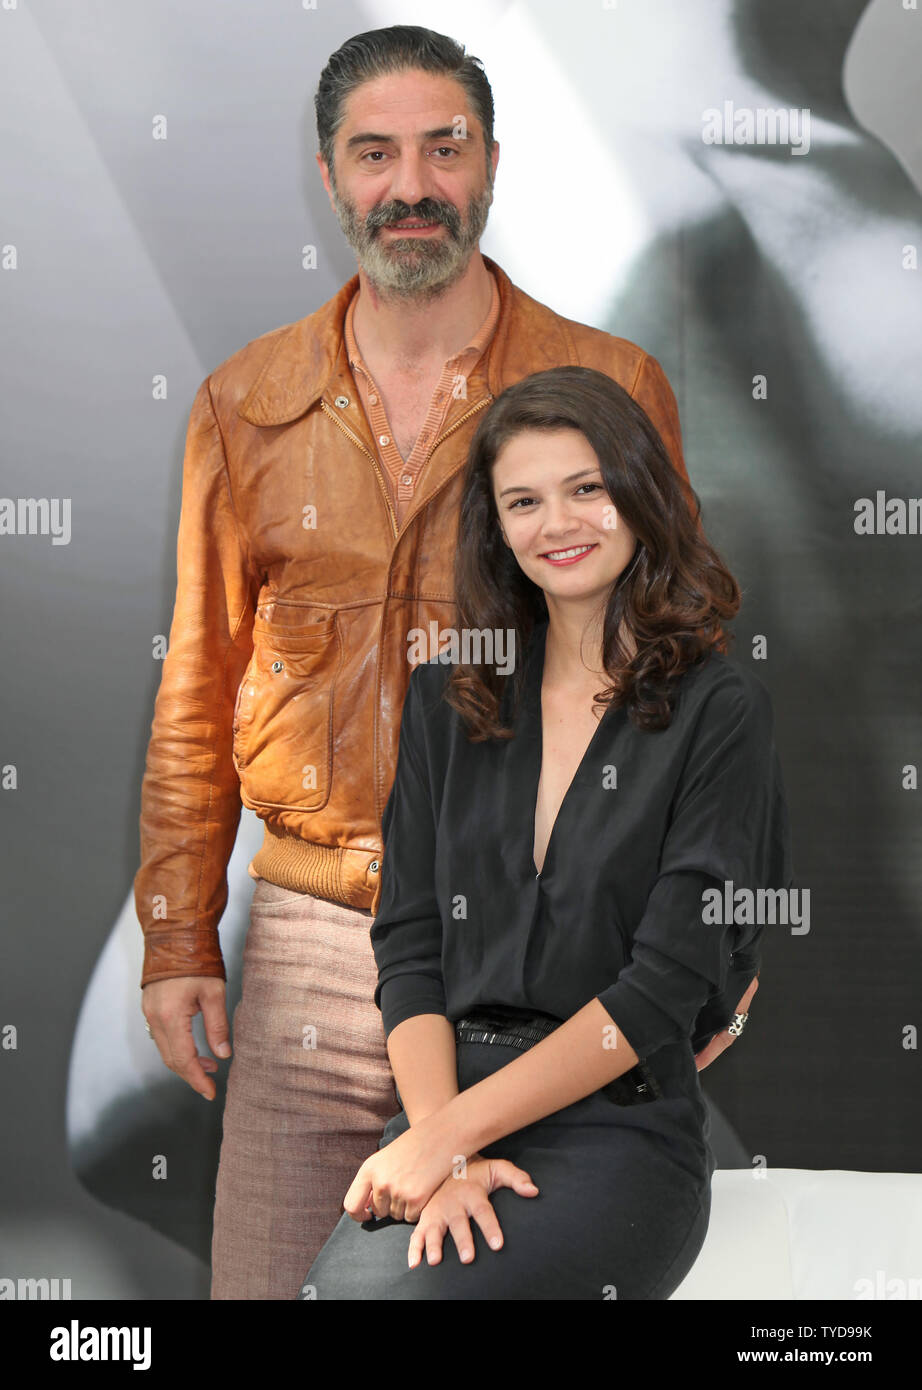 Simon Abkarian (L) and Stephanie Pasterkamp arrive at the photo call for the series 'Kaboul Kitchen' during the 52nd annual Monte Carlo Television Festival in Monte Carlo, Monaco on June 14, 2012.  UPI/David Silpa Stock Photo